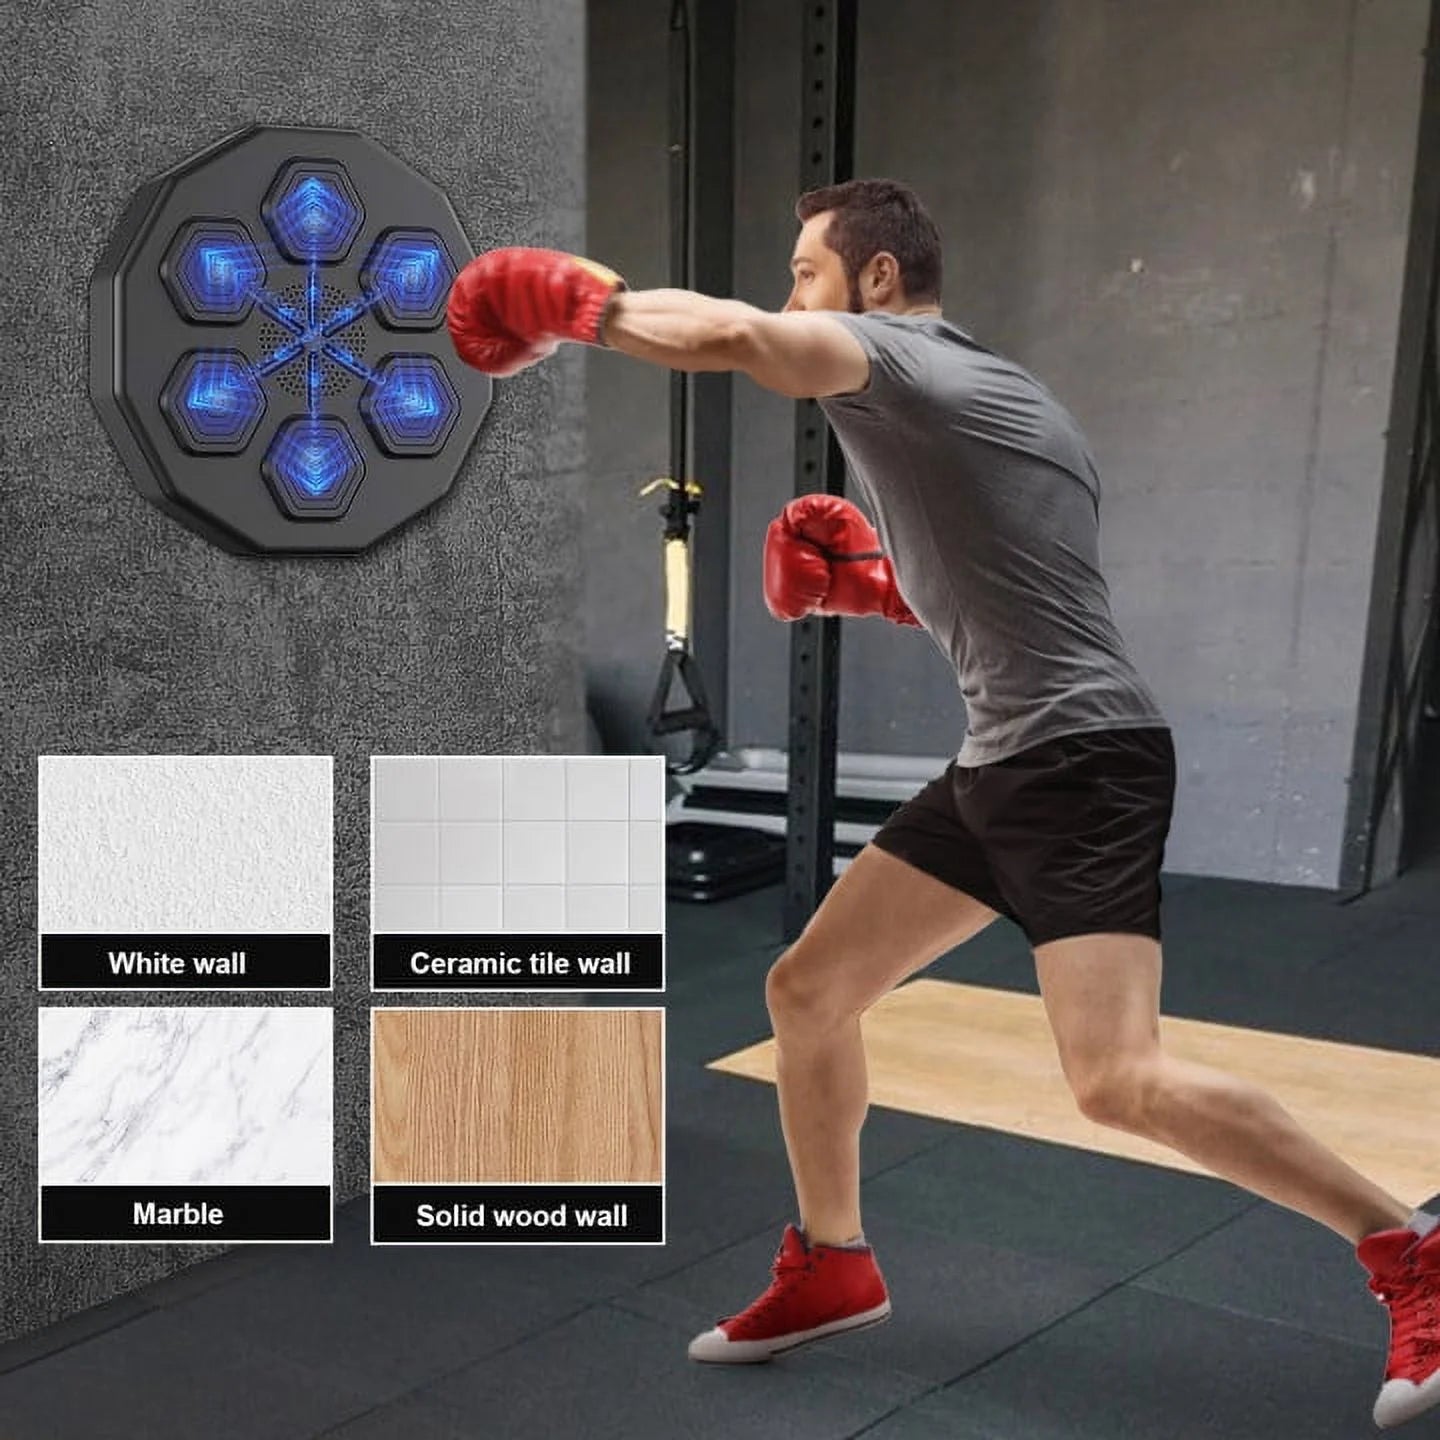 Music Boxing Machine, Smart Bluetooth Connection Boxing Equipment, Fight Reaction Training Boxing Pad, Release Pressure Wall Mounted Punching Equipment with Boxing Gloves